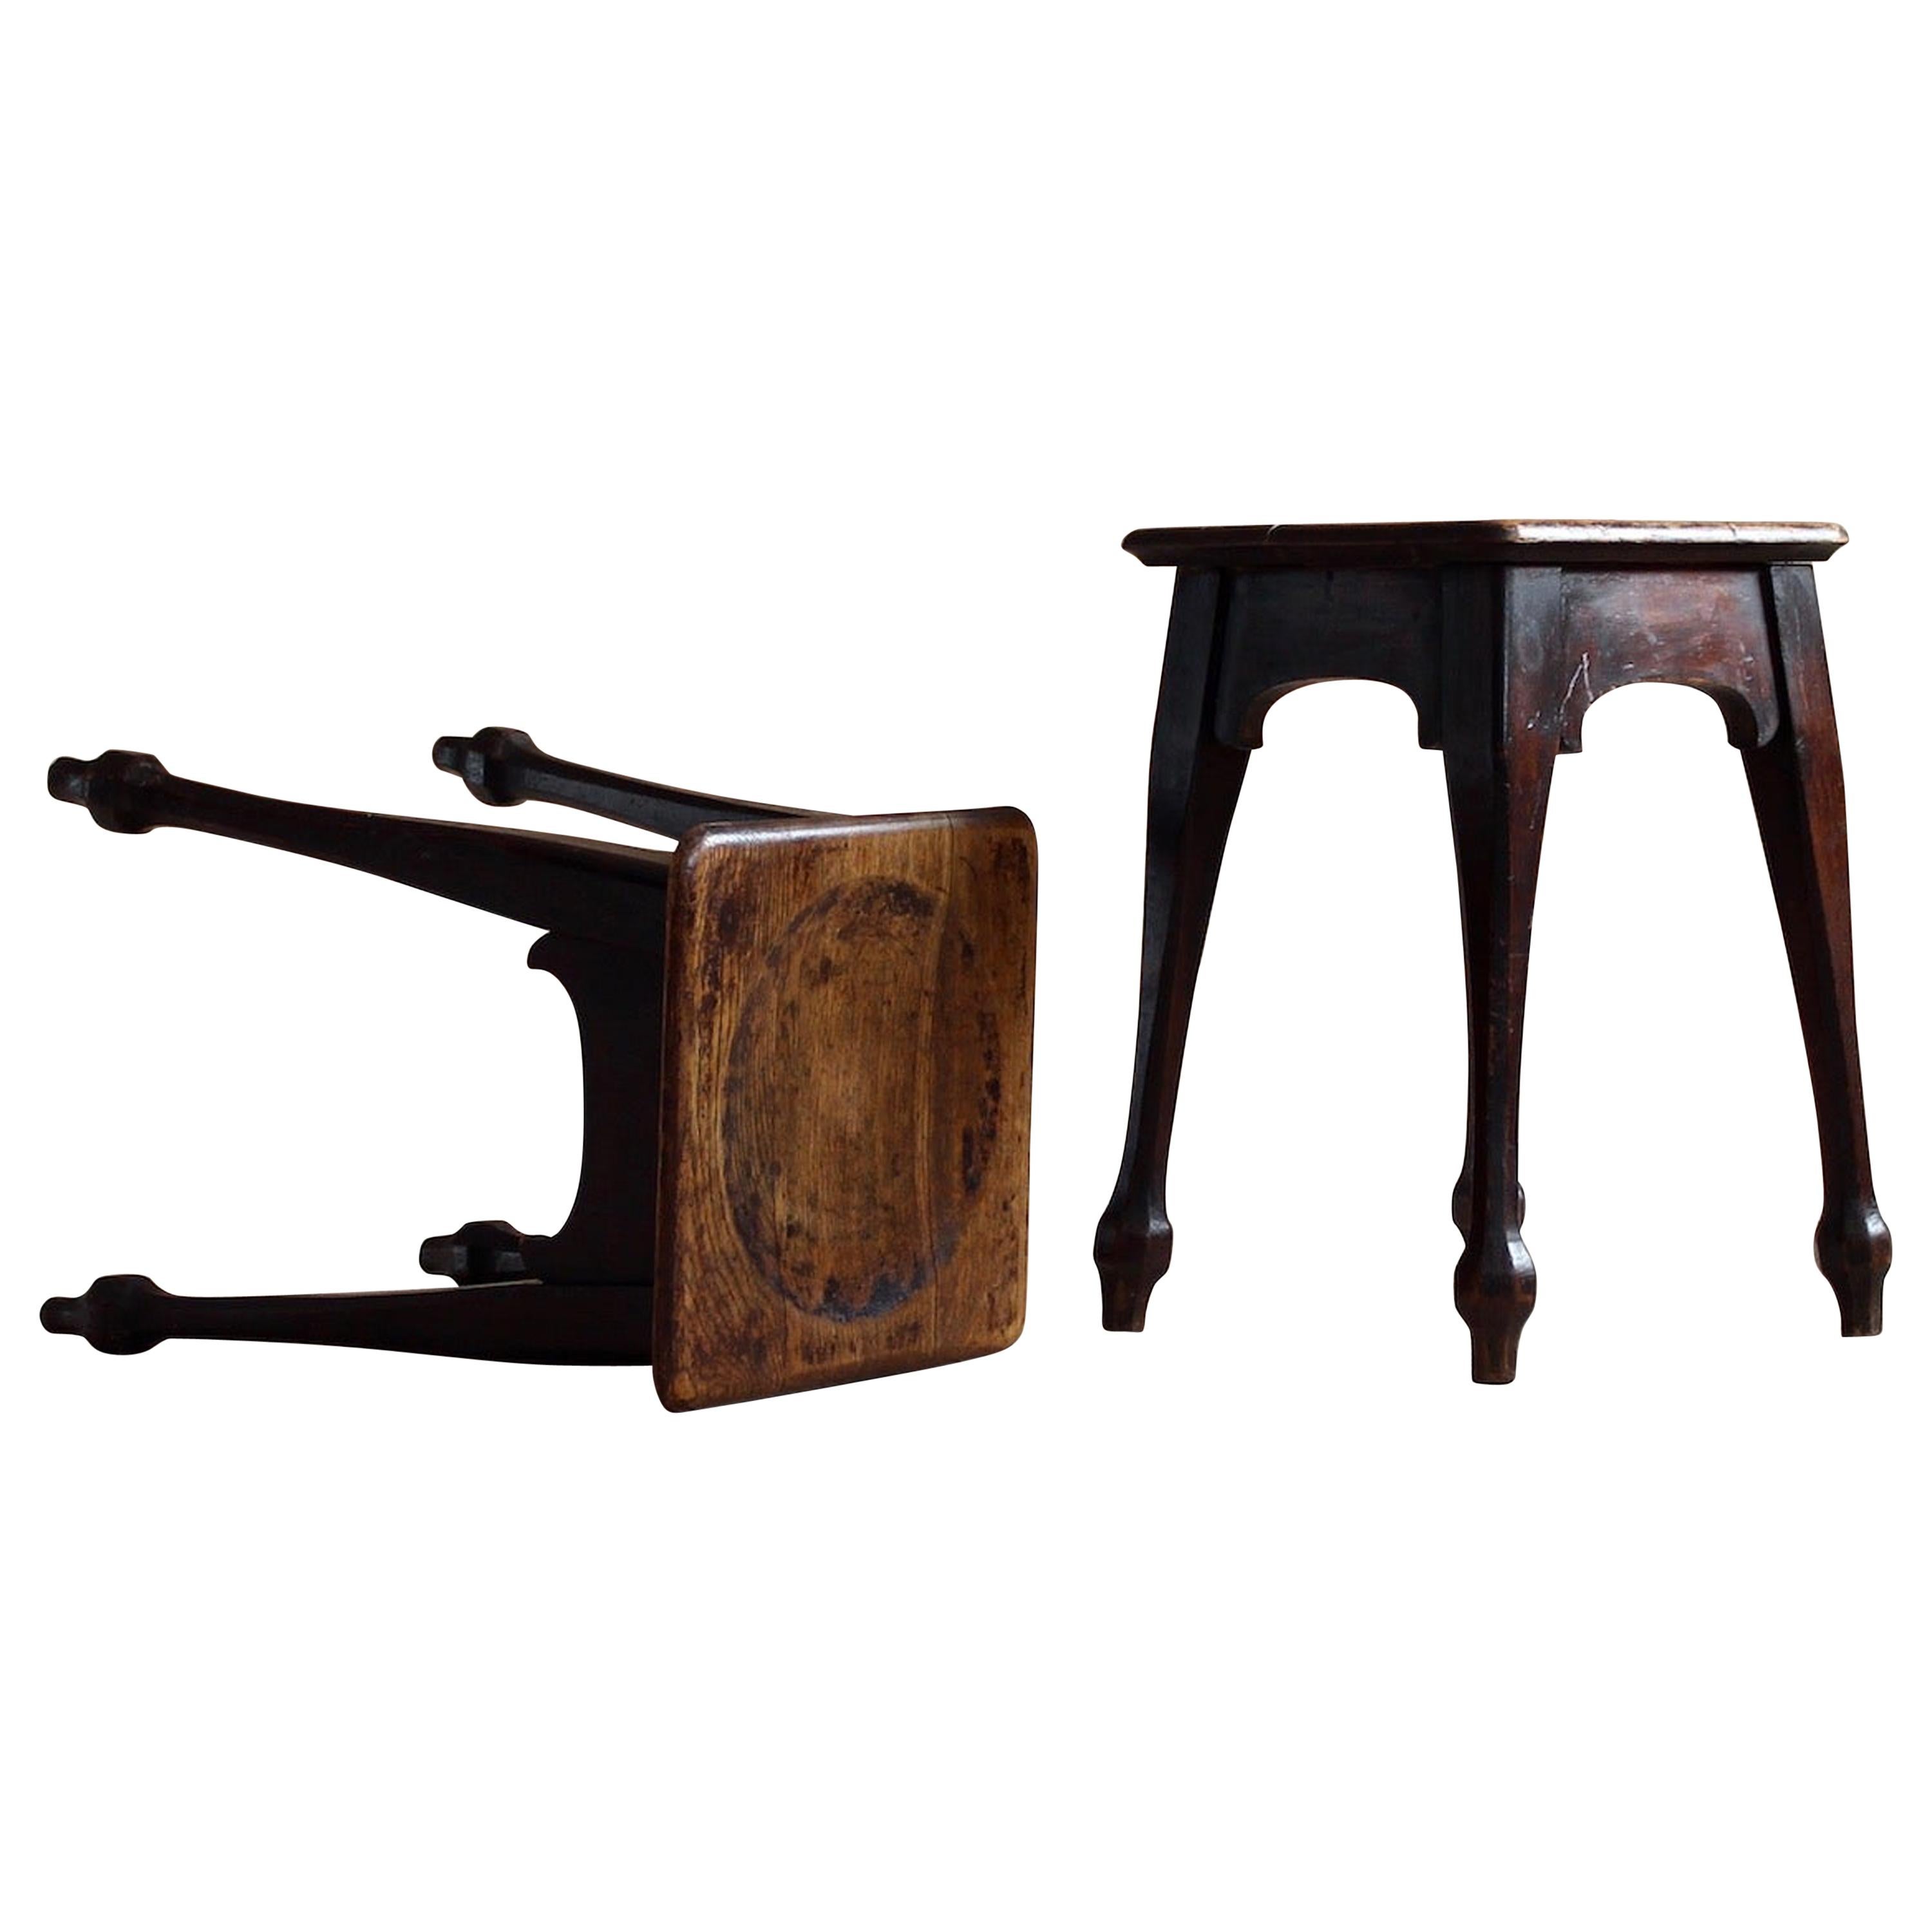 Set of Two Oak Stools, Early 20th Century